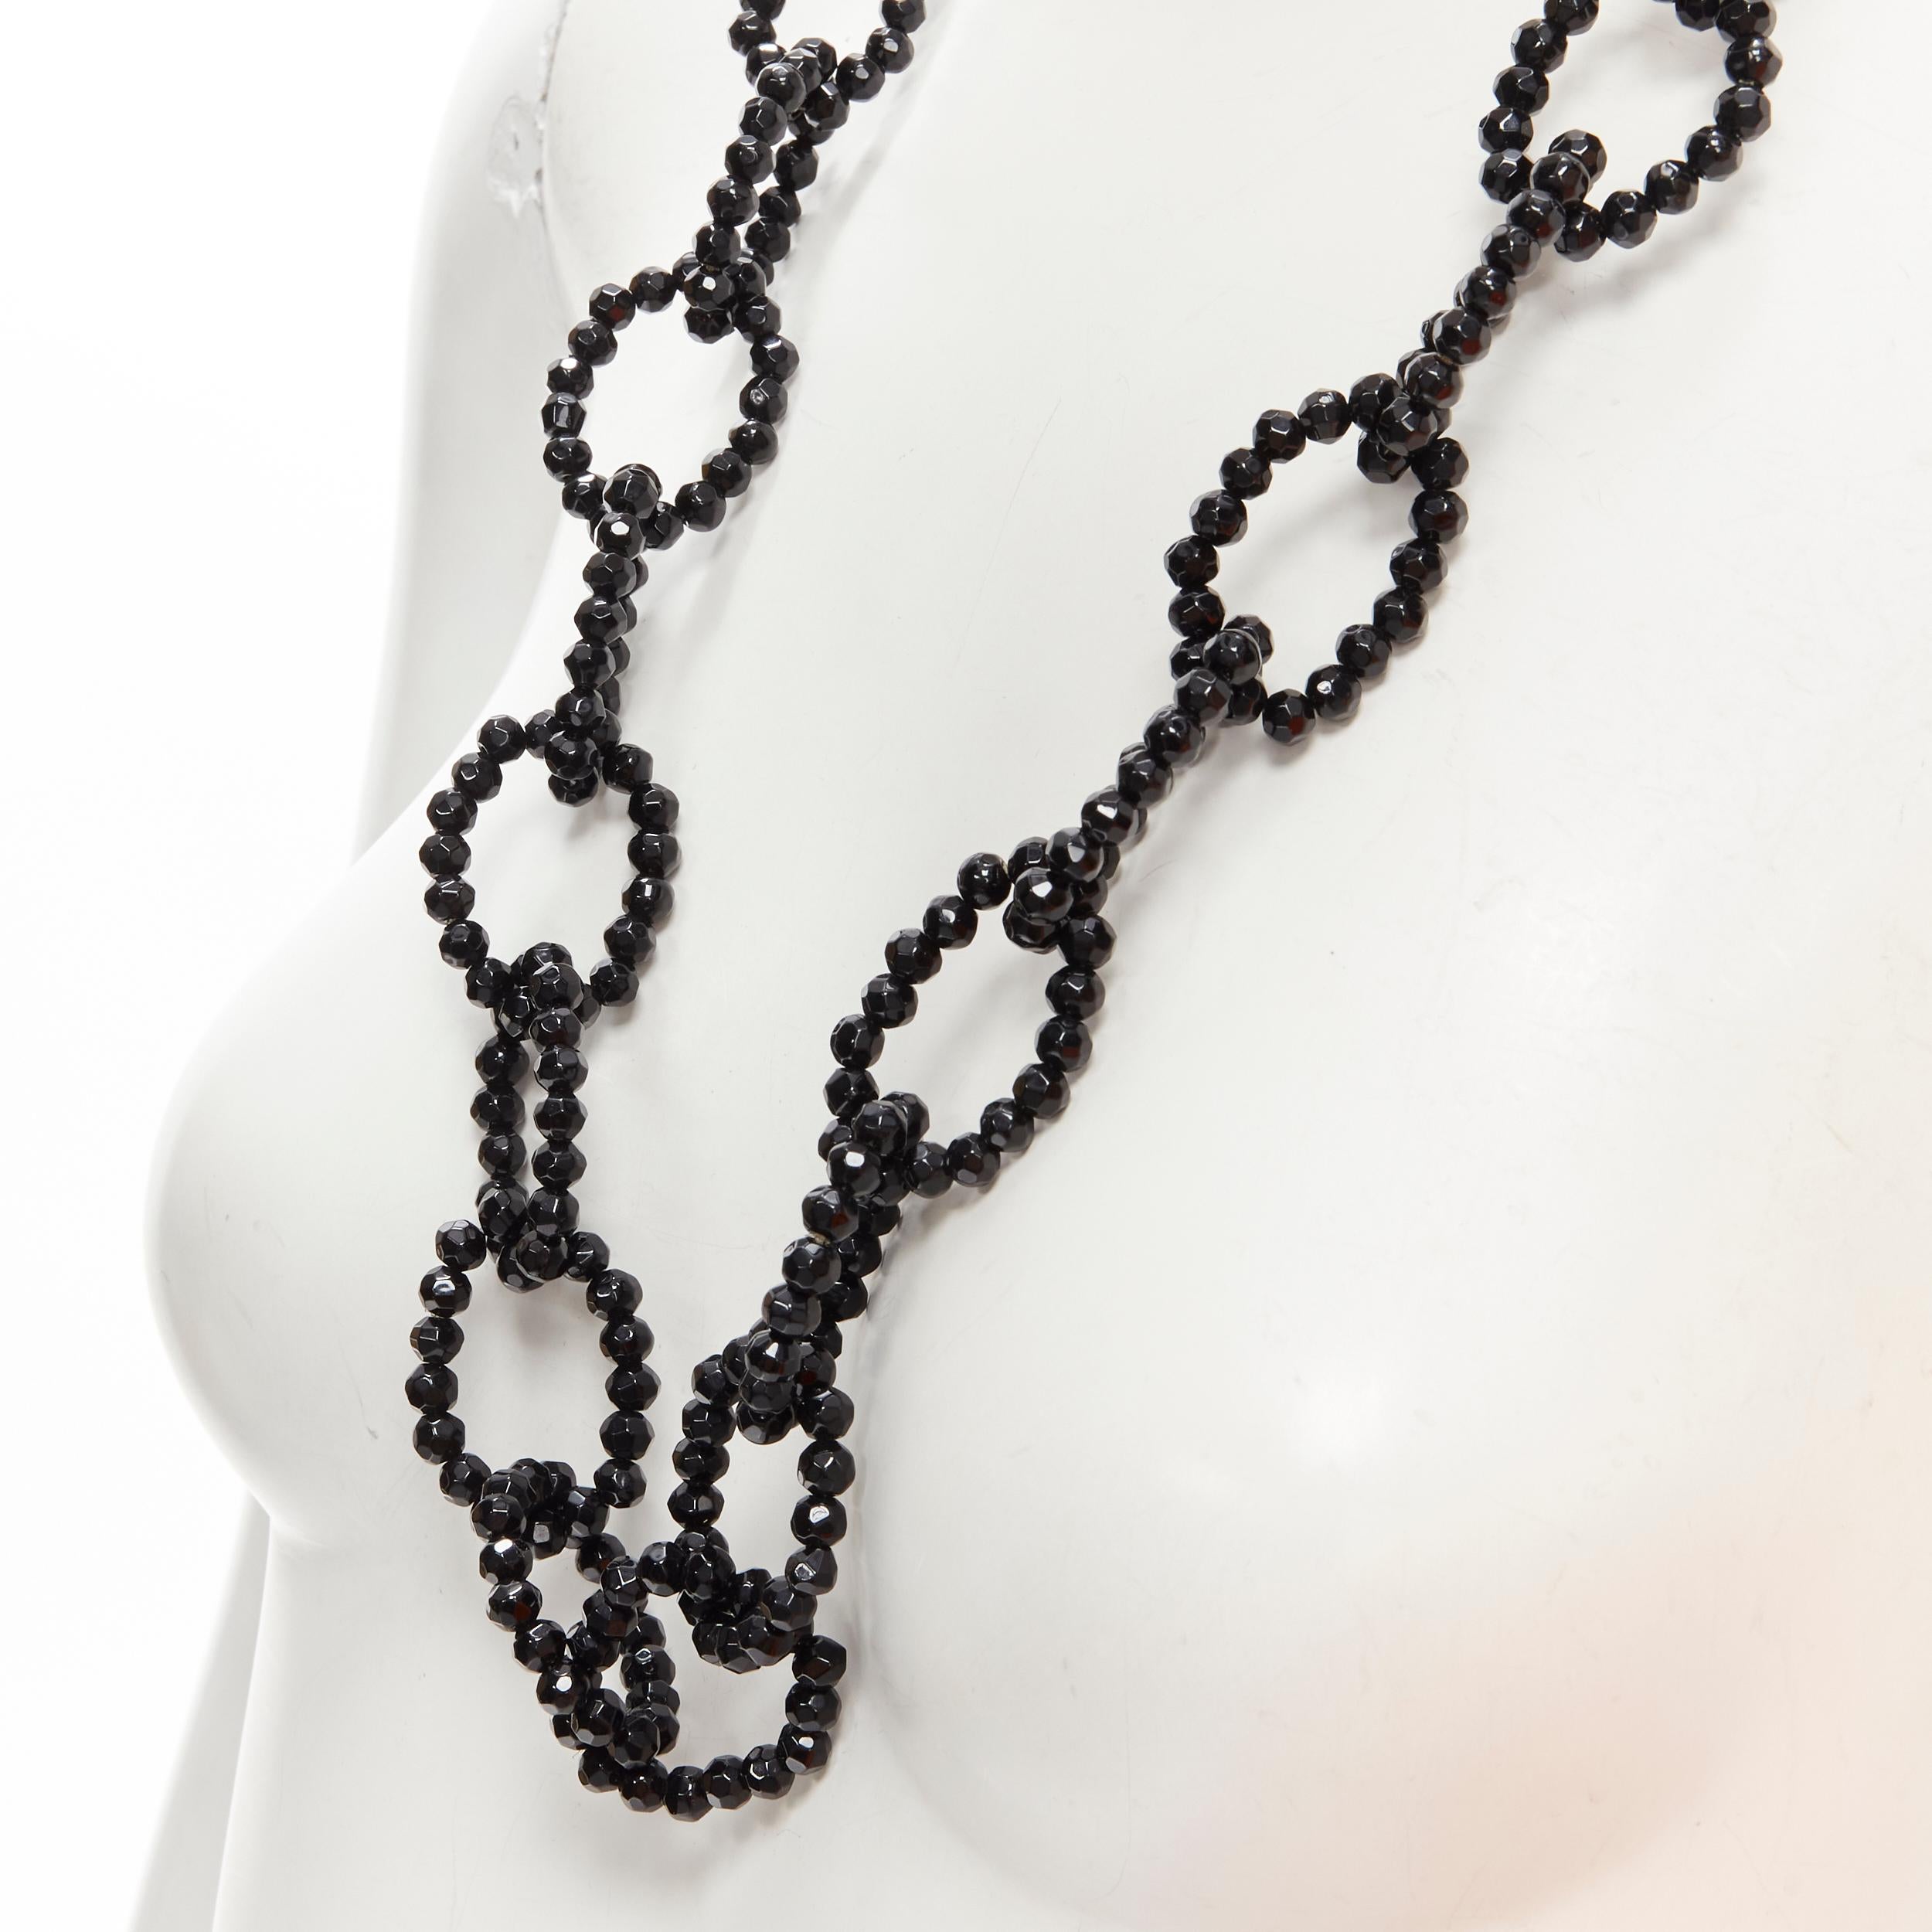 LEE ANGEL black beads loop chain long oversized statement necklace For Sale 3